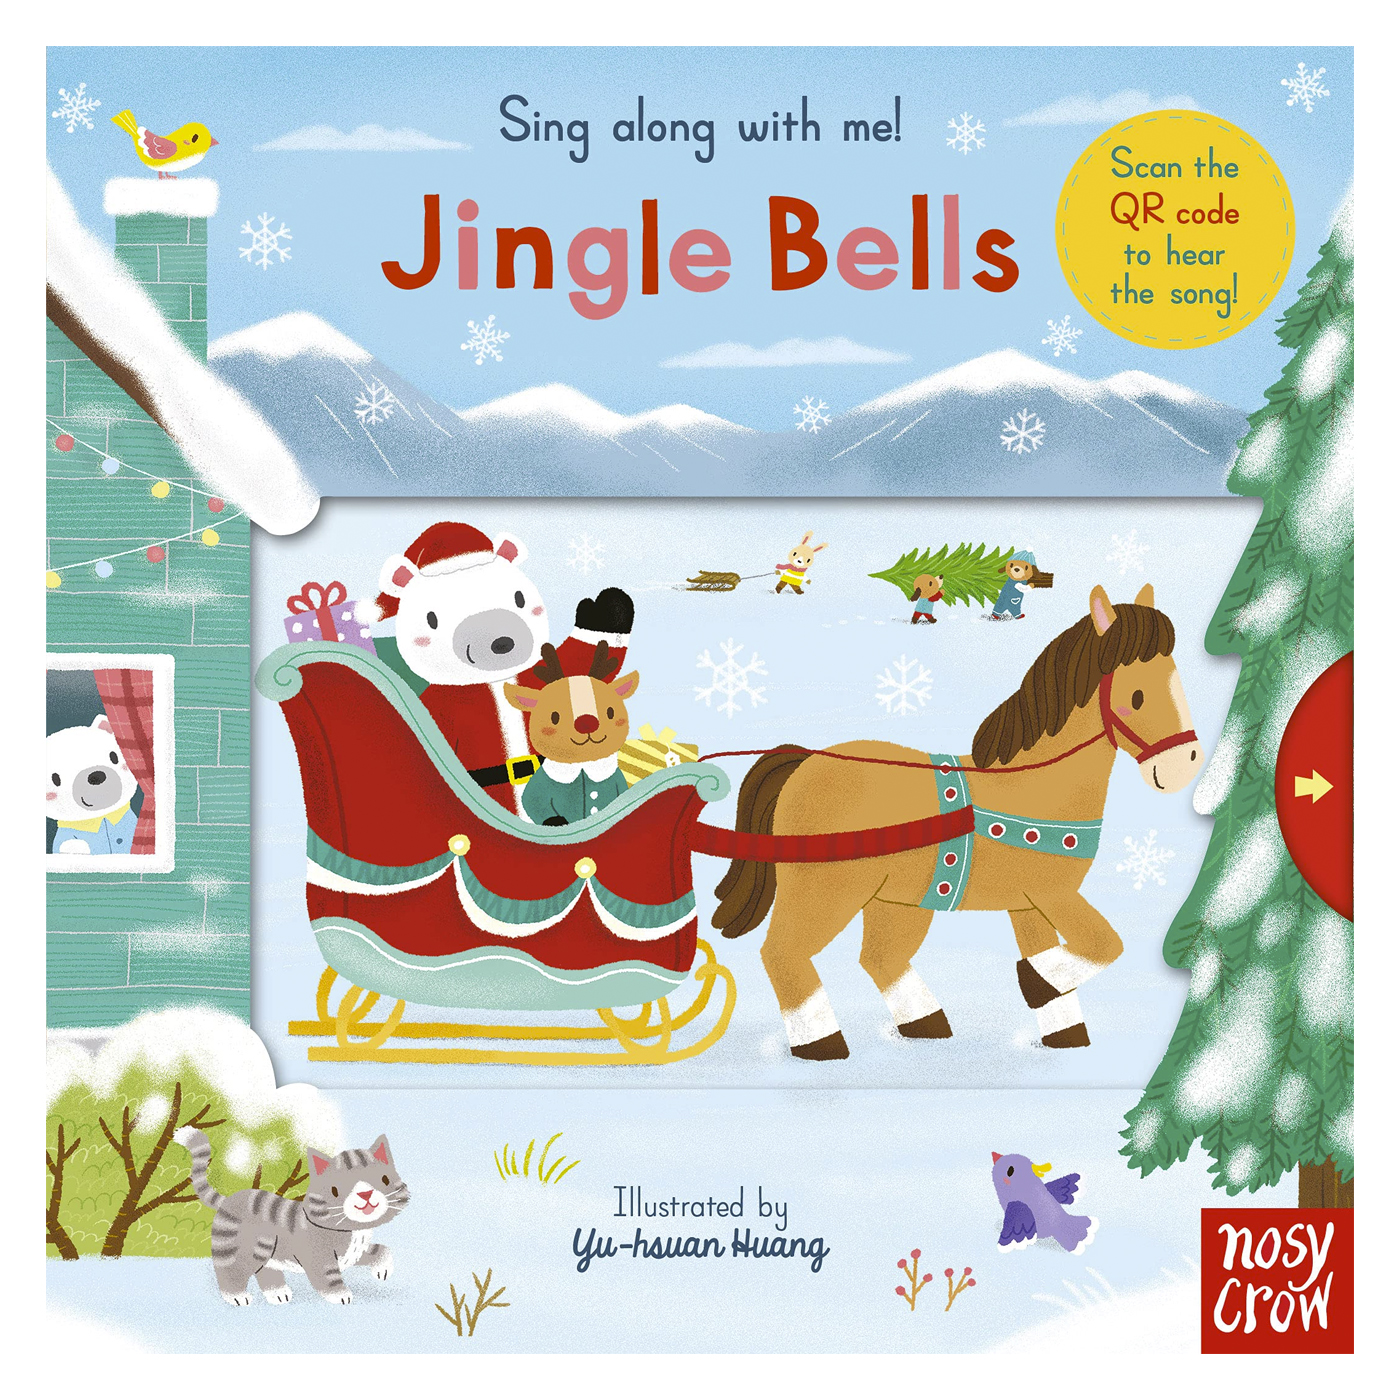  Sing along with me! Jingle Bells